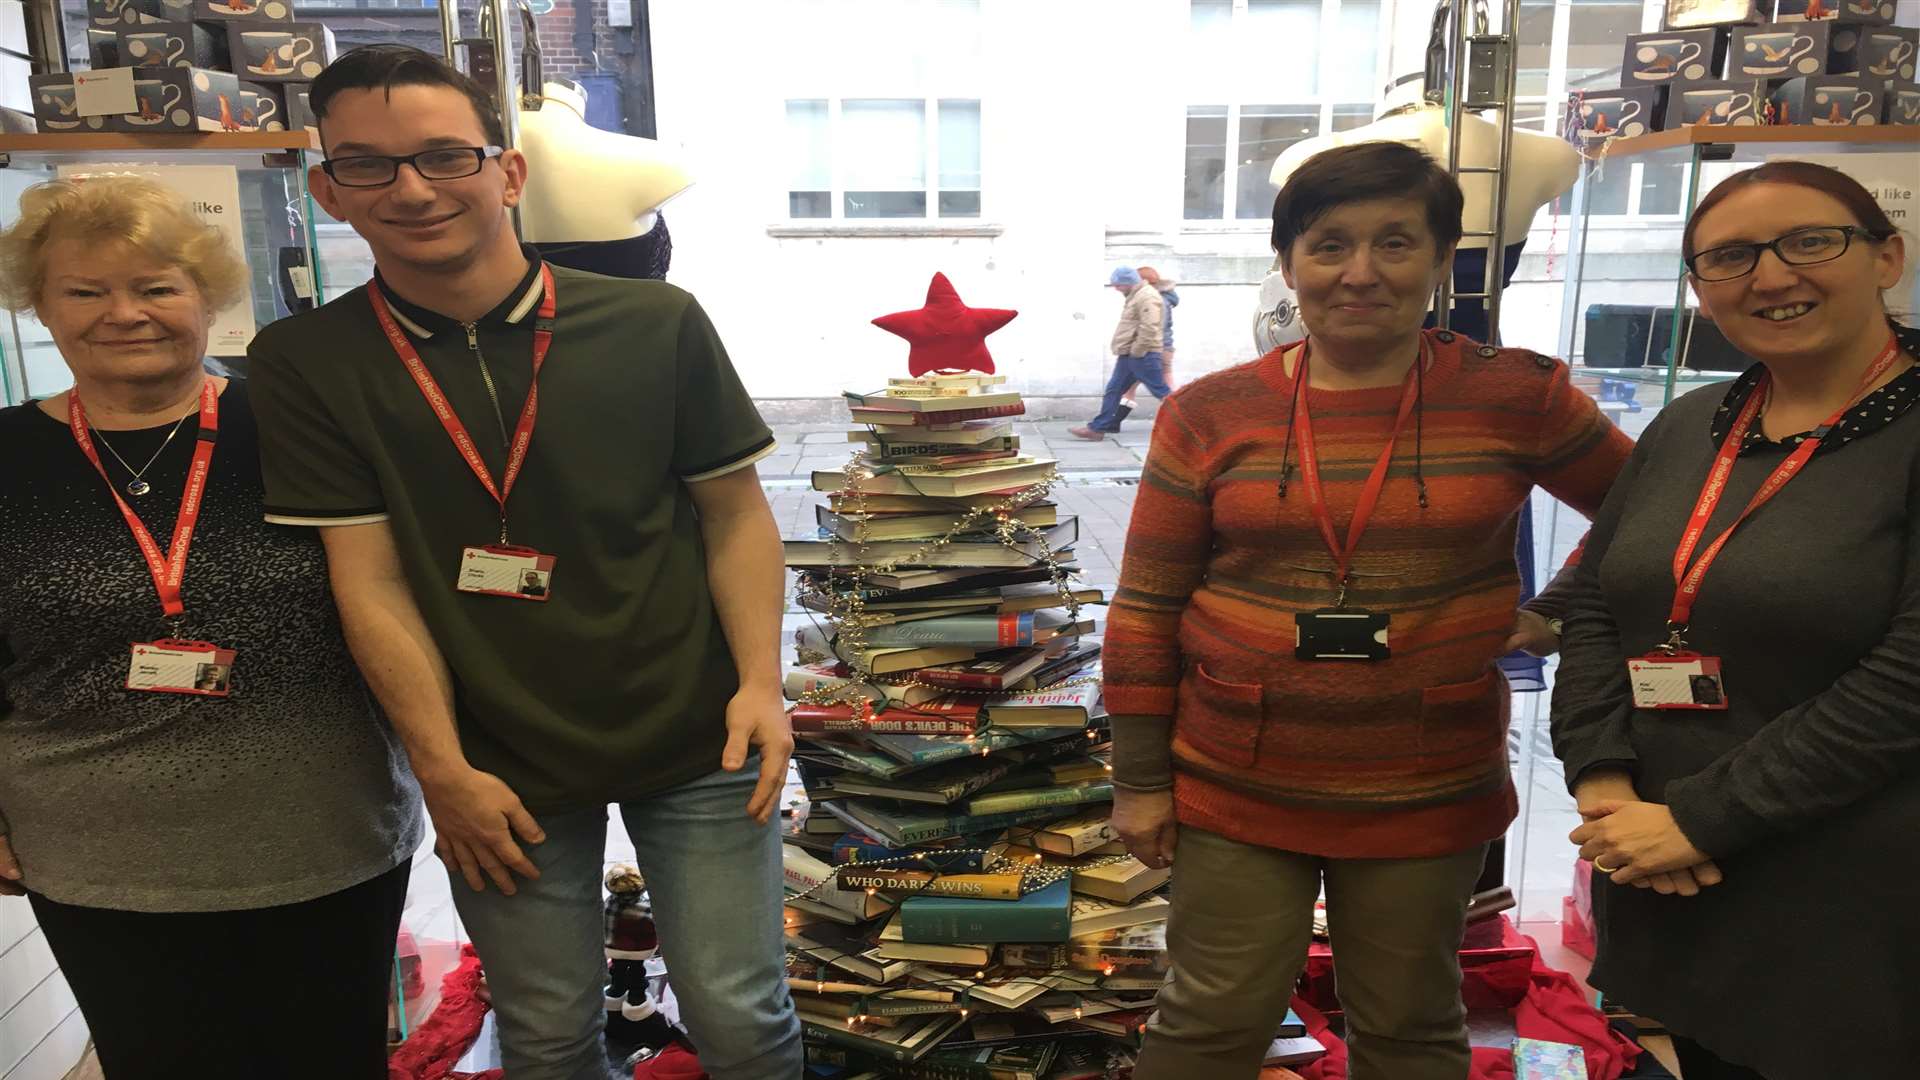 Staff at Gravesend's British Red Cross charity shop, next to their unique Christmas tree